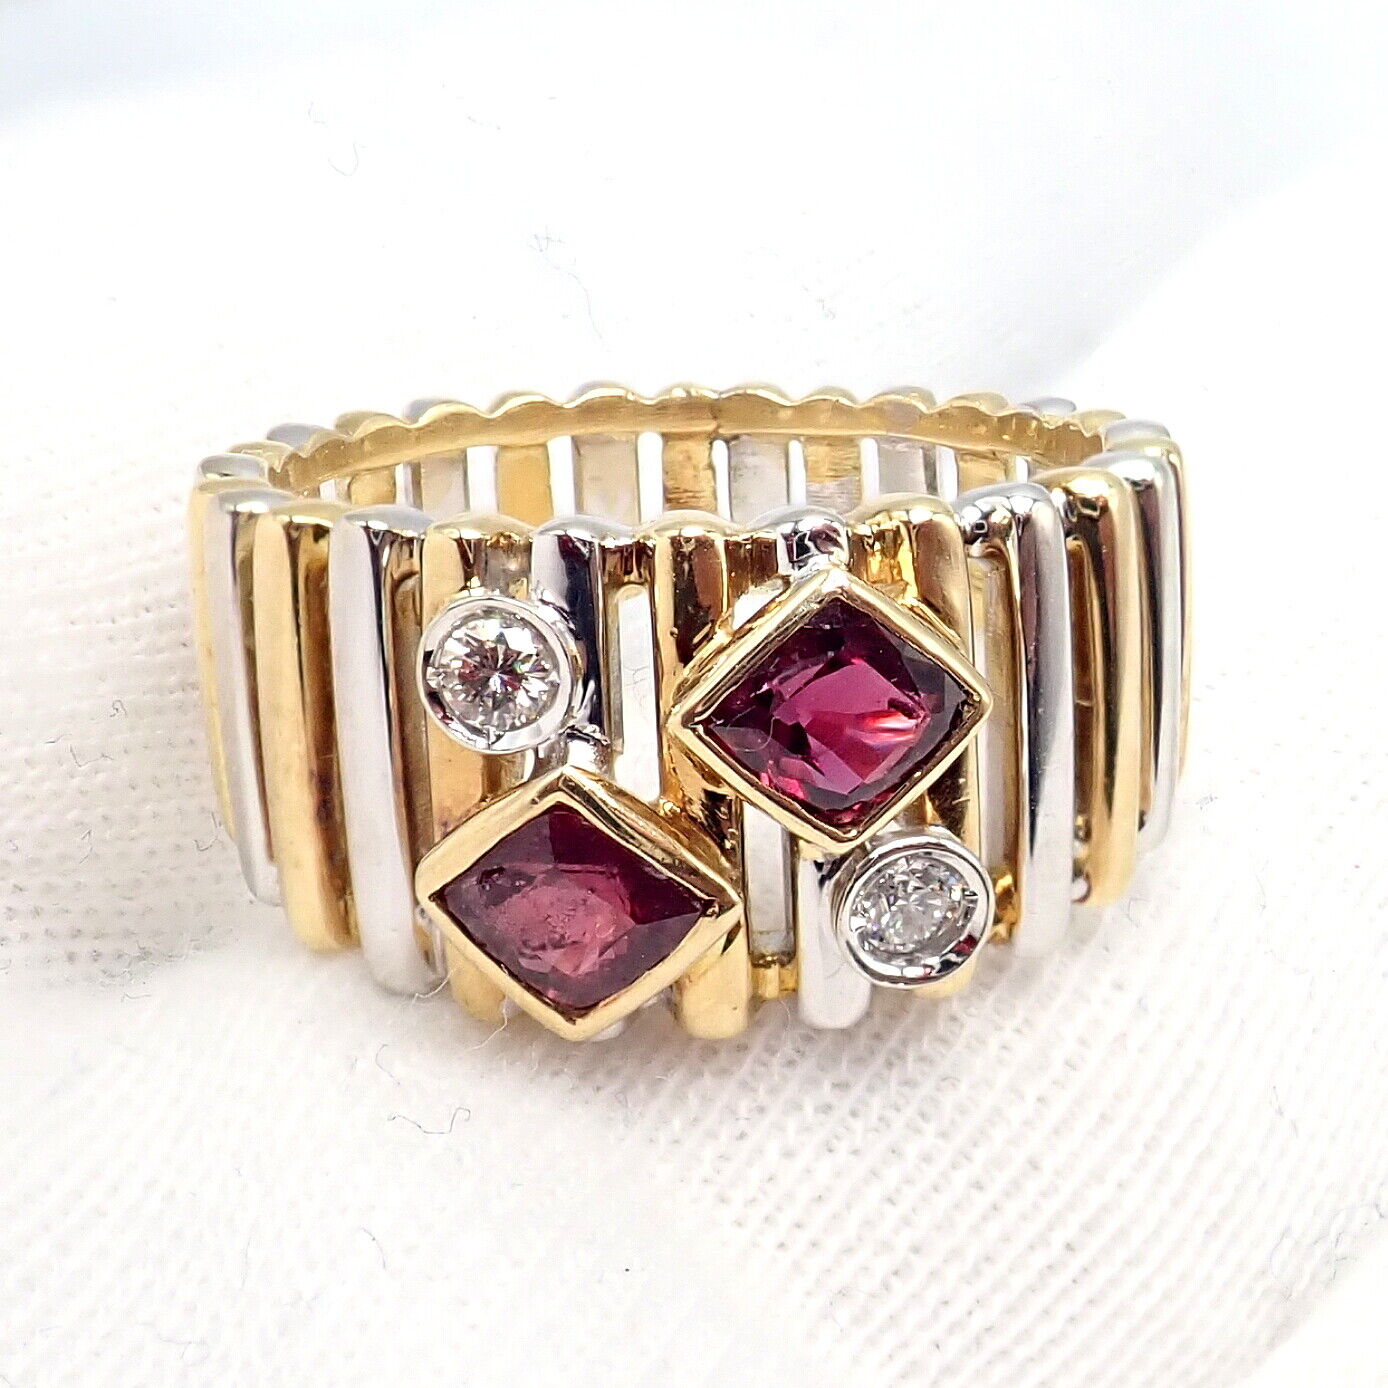 Van Cleef & Arpels Jewelry & Watches:Fine Jewelry:Rings Rare! Authentic Van Cleef & Arpels 18k Yellow + White Gold Diamond Ruby Ring